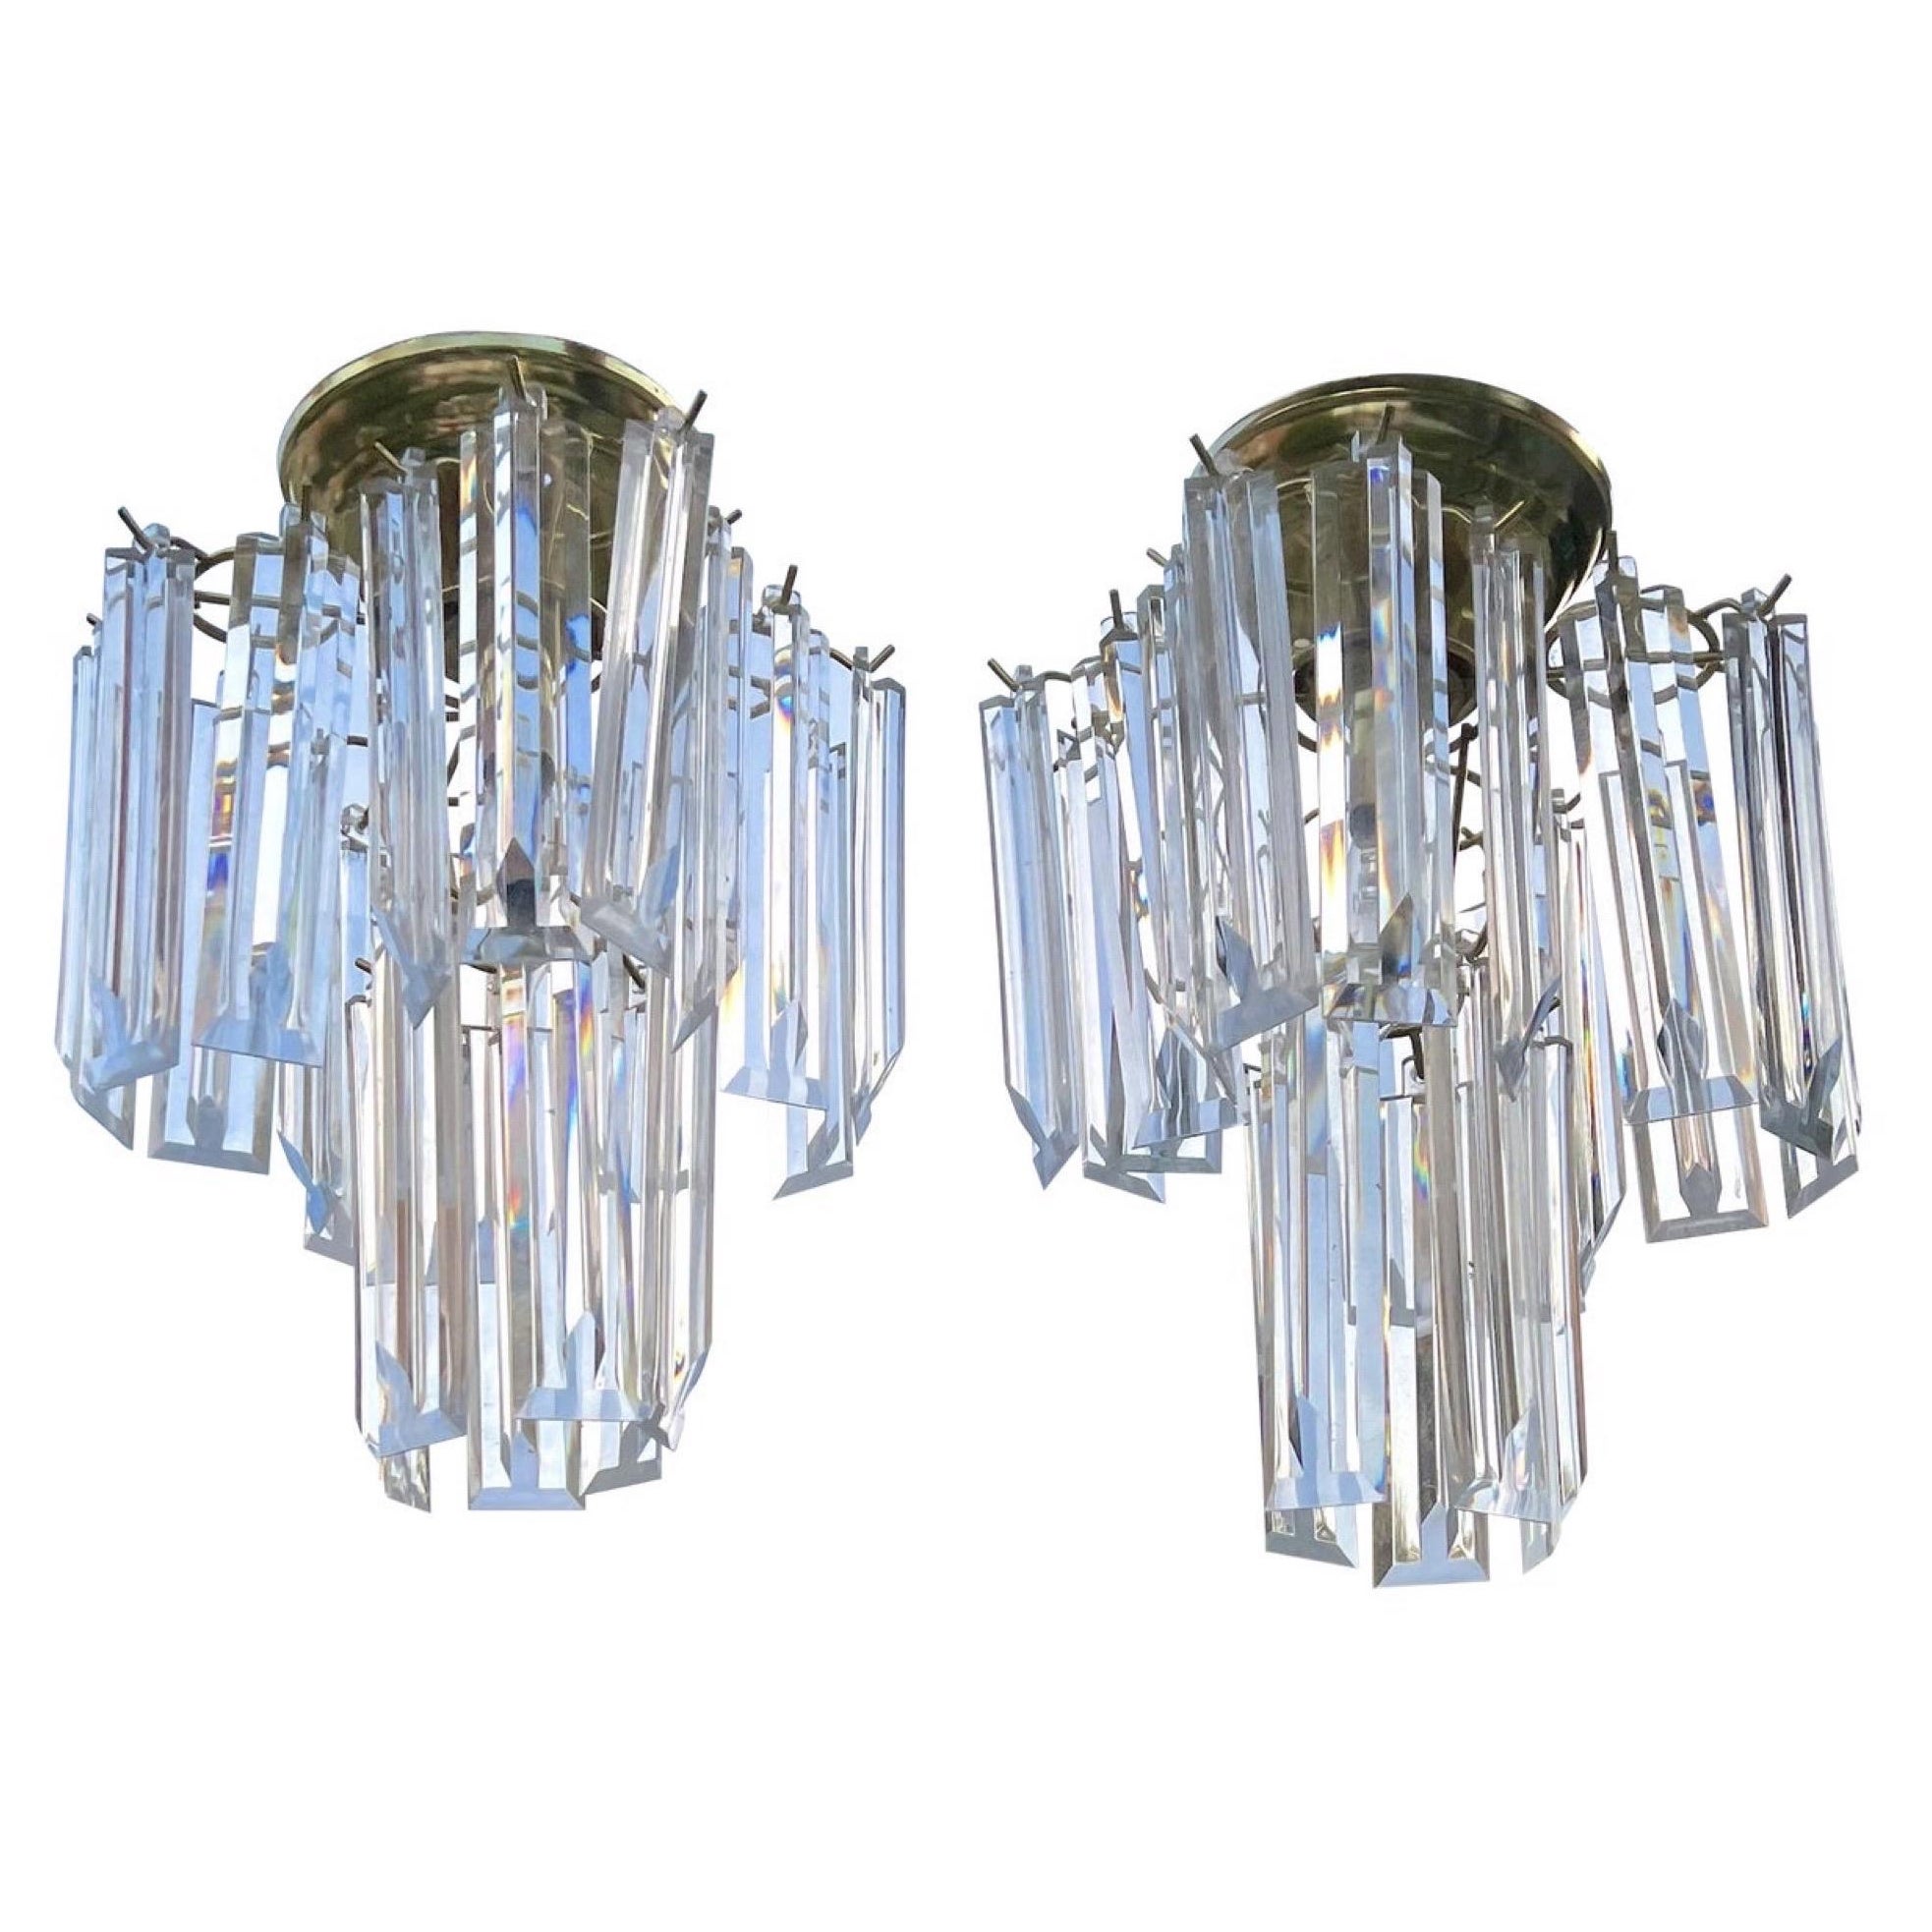 Hollywood Regency Lucite Chandeliers, a Pair